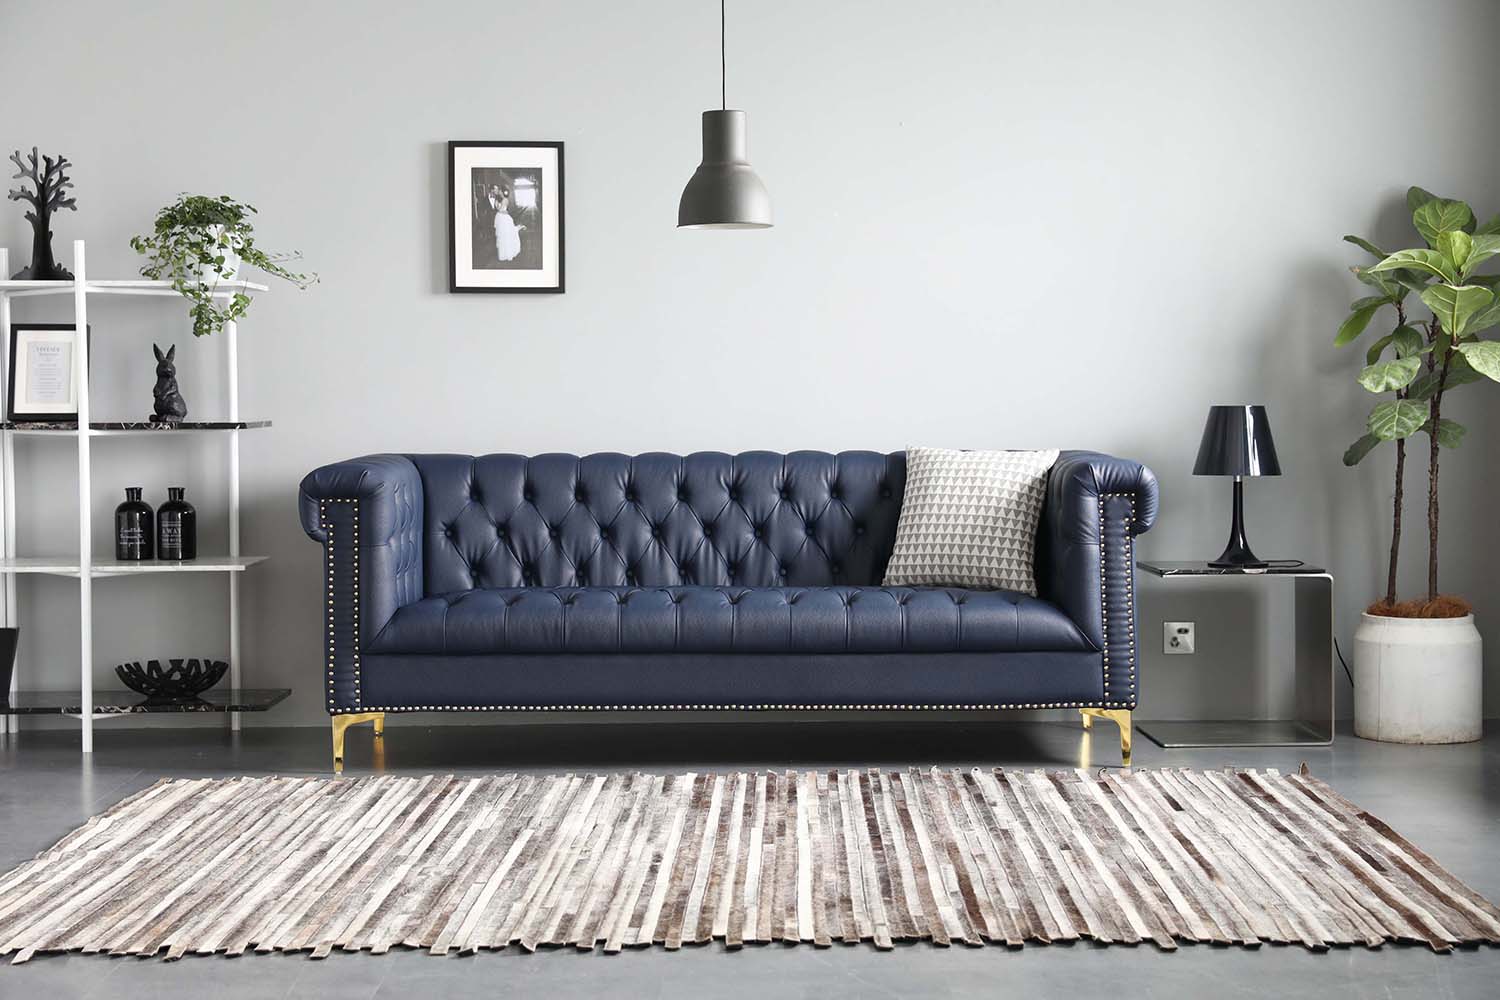 squarerooms bed and basics blue chesterfield leather sofa couch living room